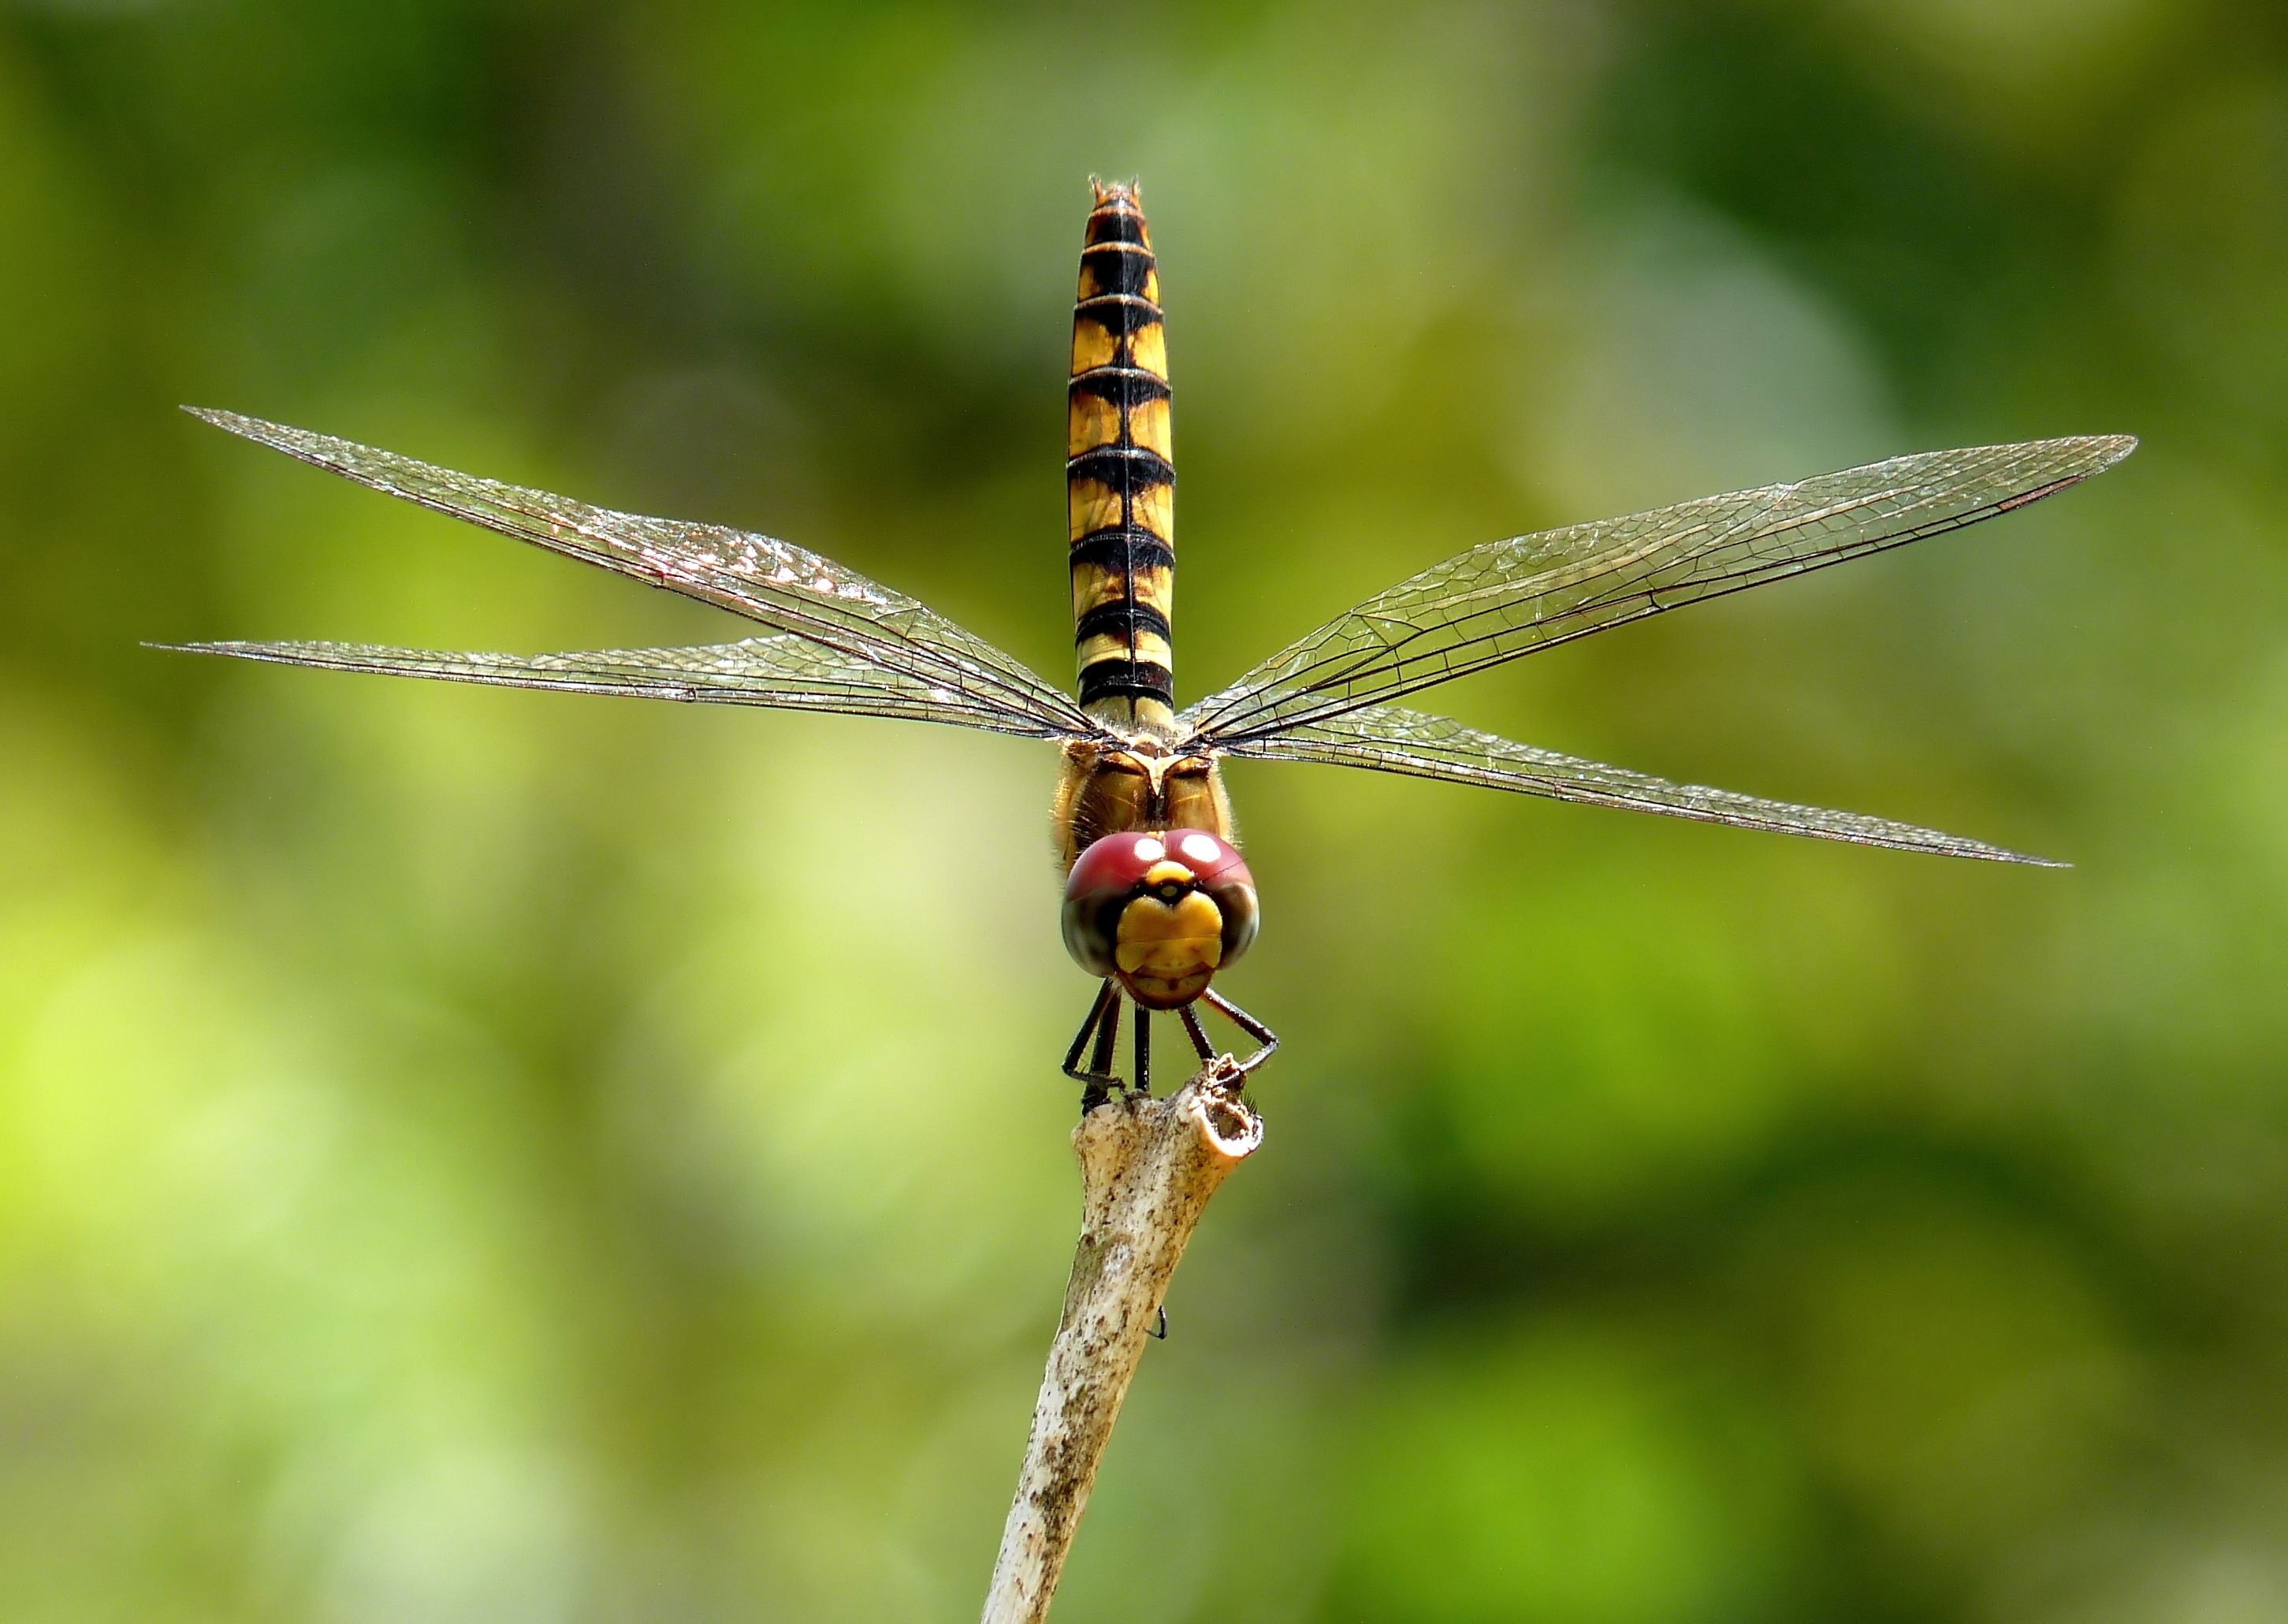 Wallpapers insects dragonfly arthropod on the desktop